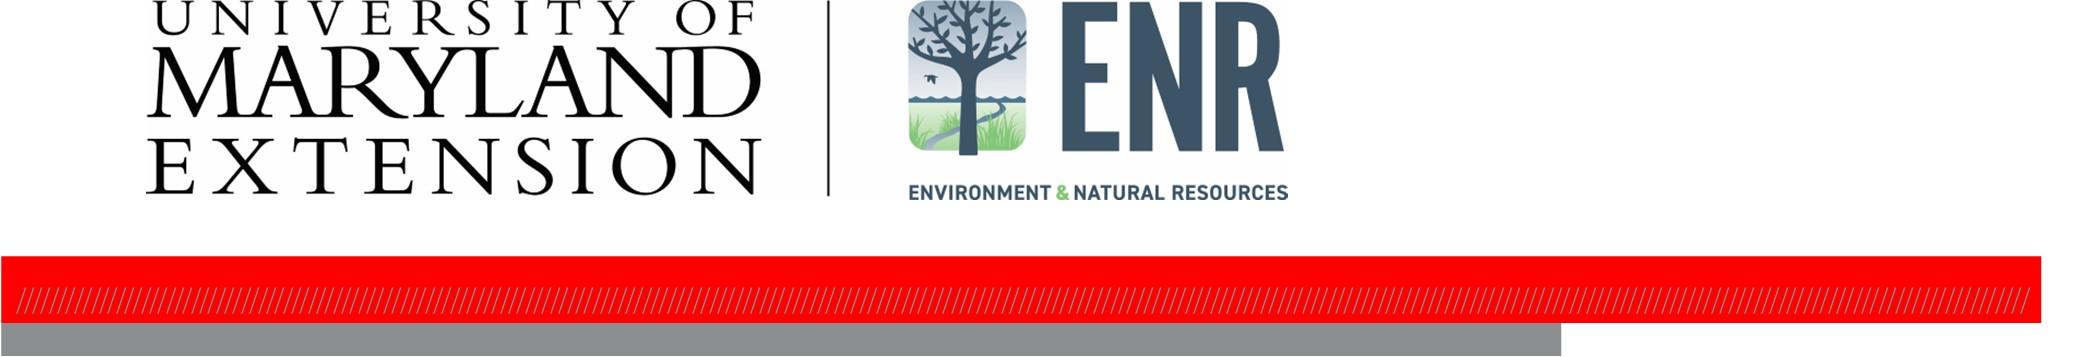 University of Maryland Extension and Environment and Natural Resources logo